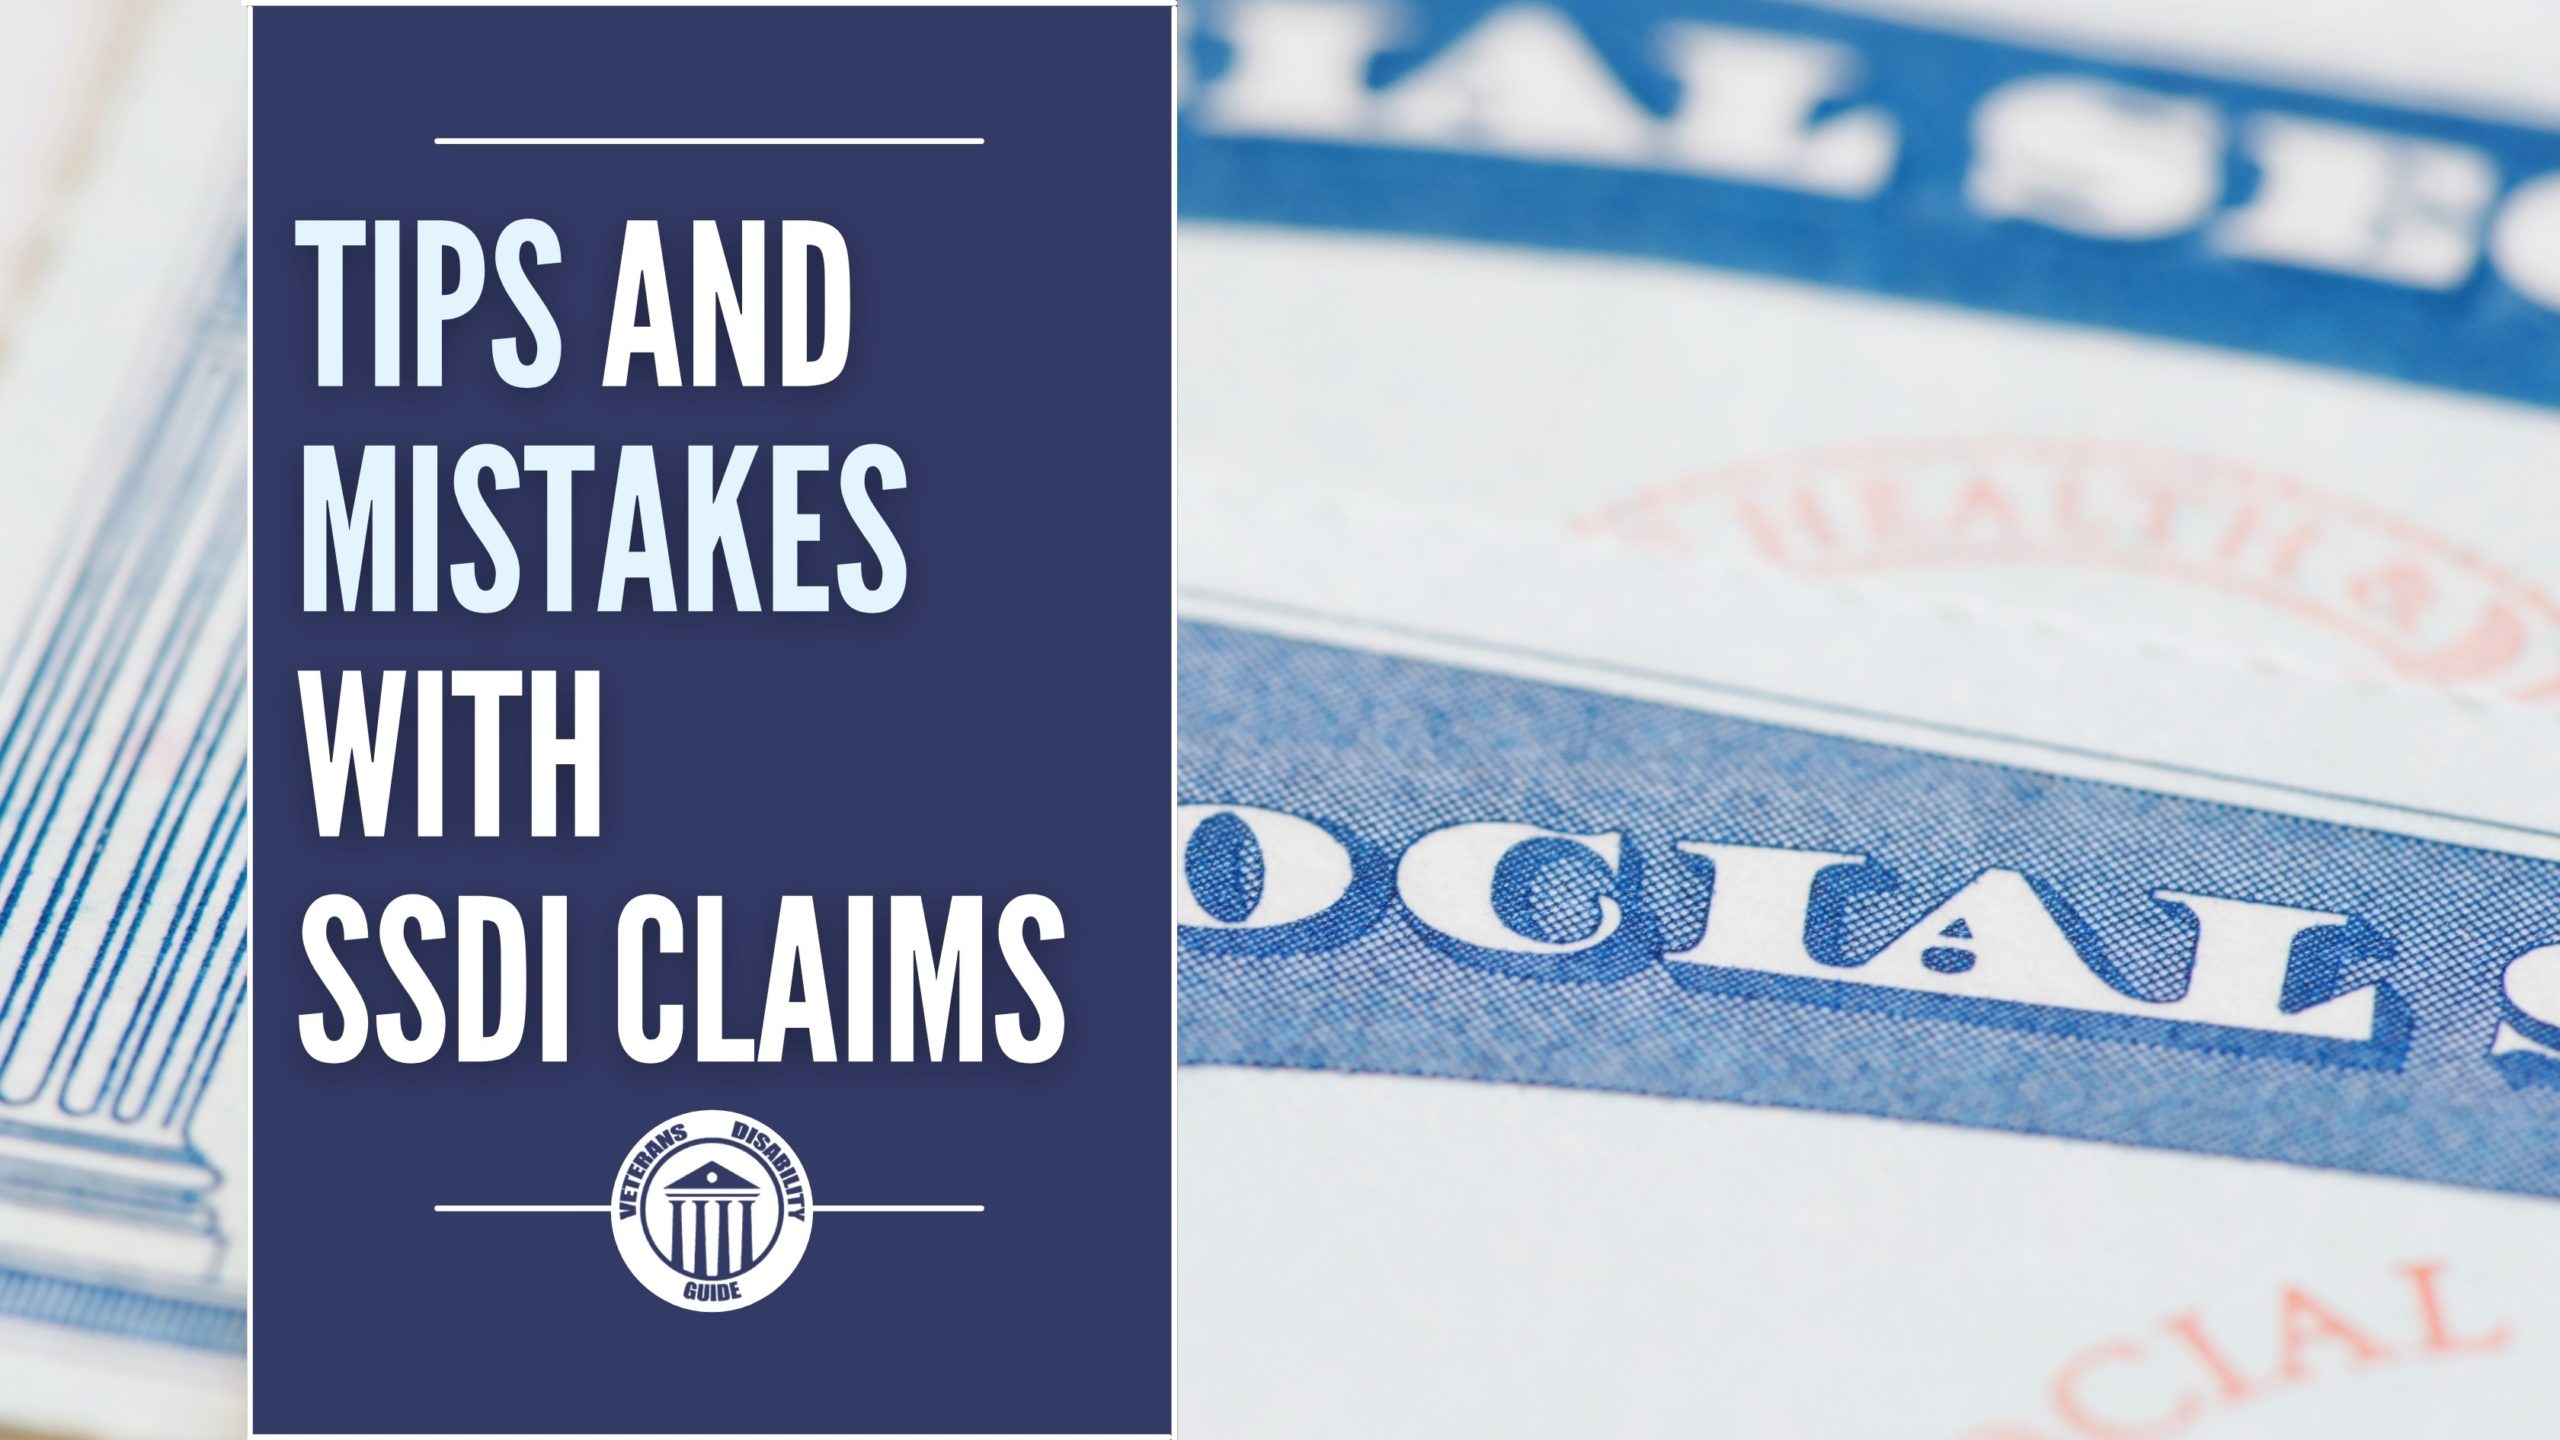 Tips And Mistakes With SSDI Claims blog header image